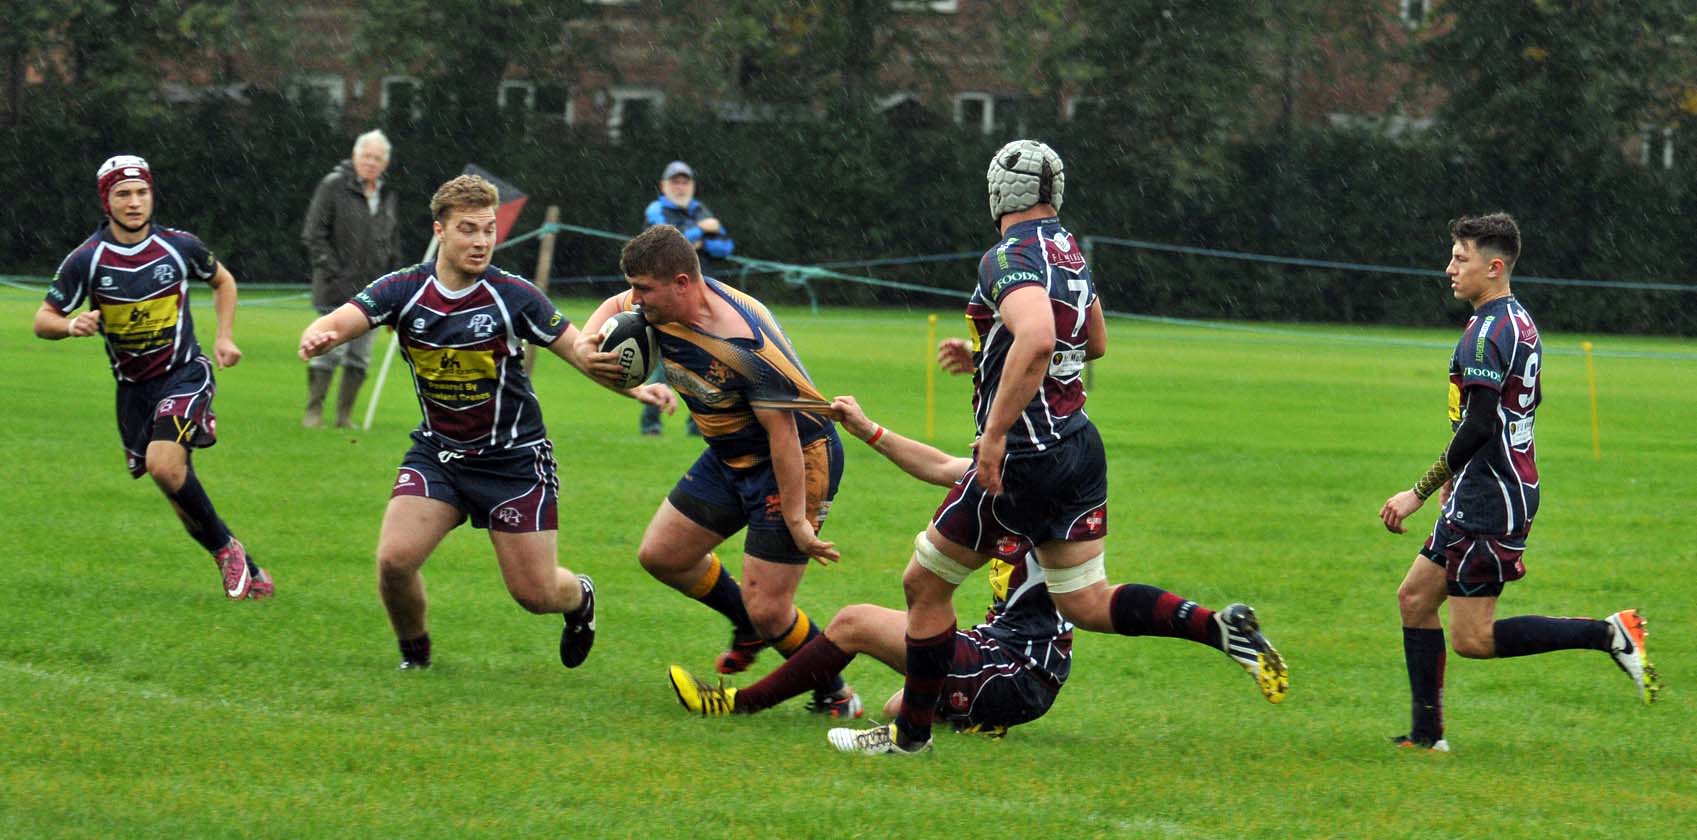 STRENGTH IN NUMBERS: A host of Town players chase down an opponent on Saturday. Photo by ADRIAN SMITH